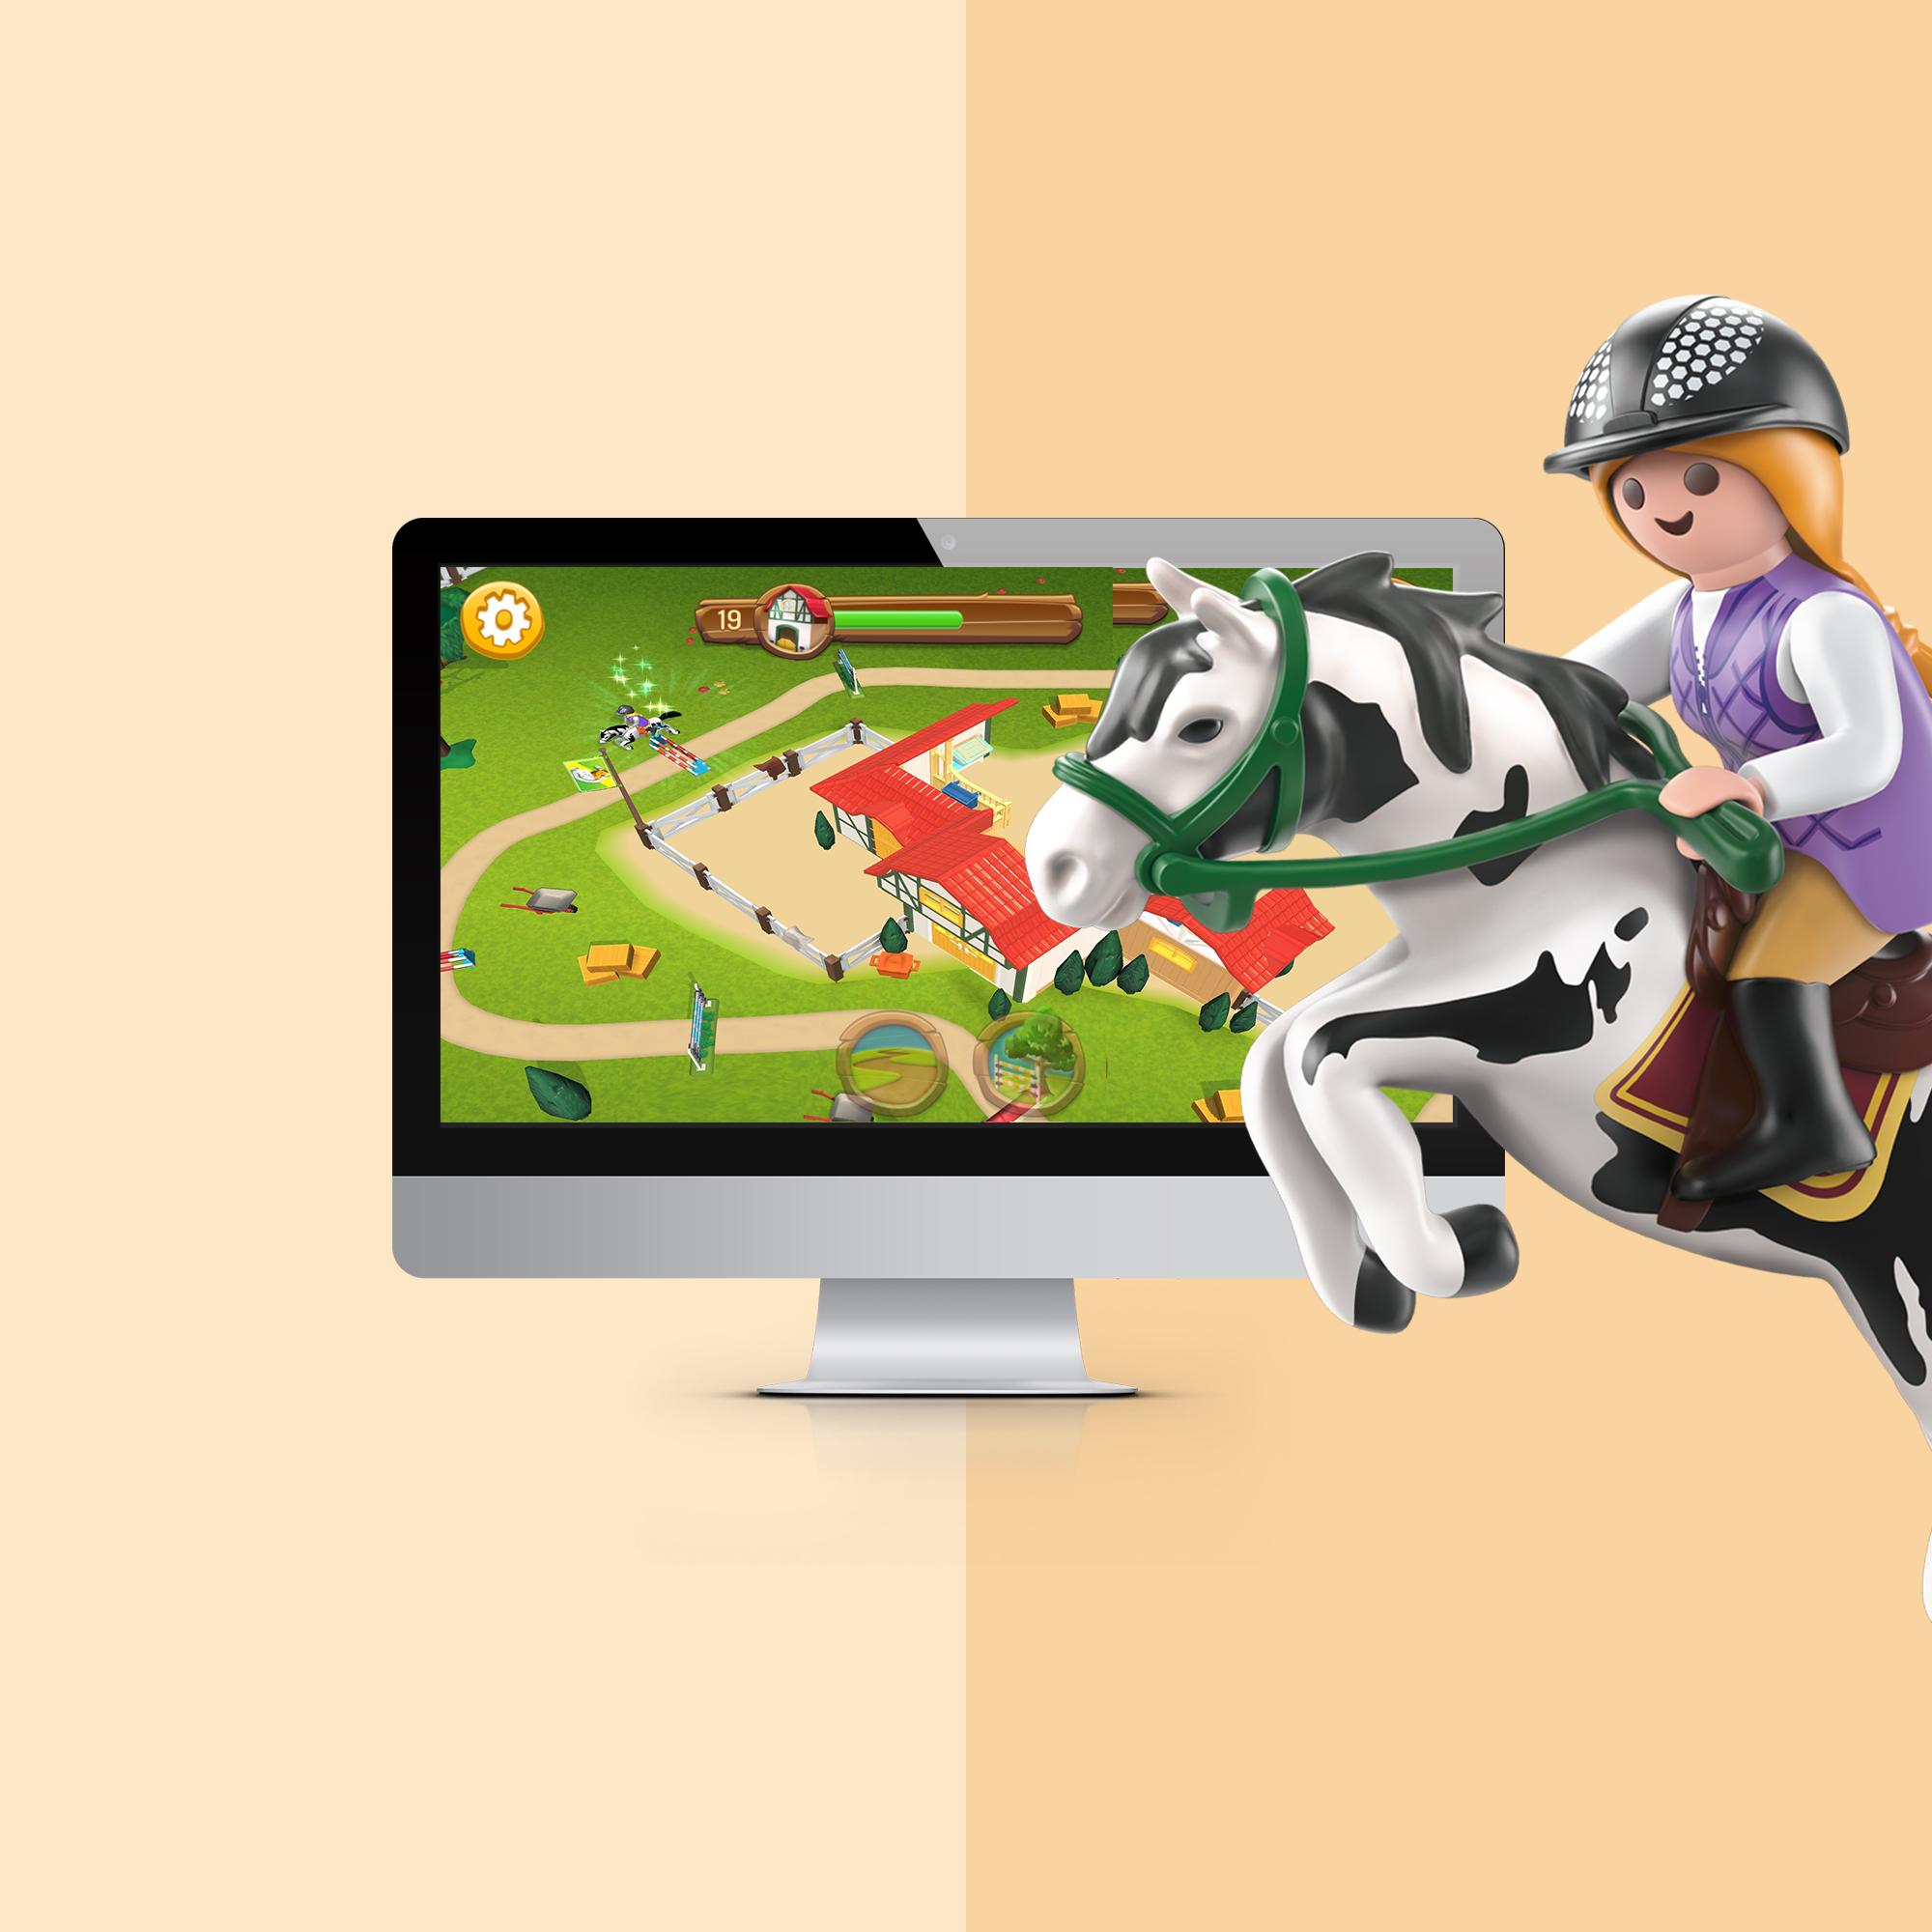 old playmobil online games